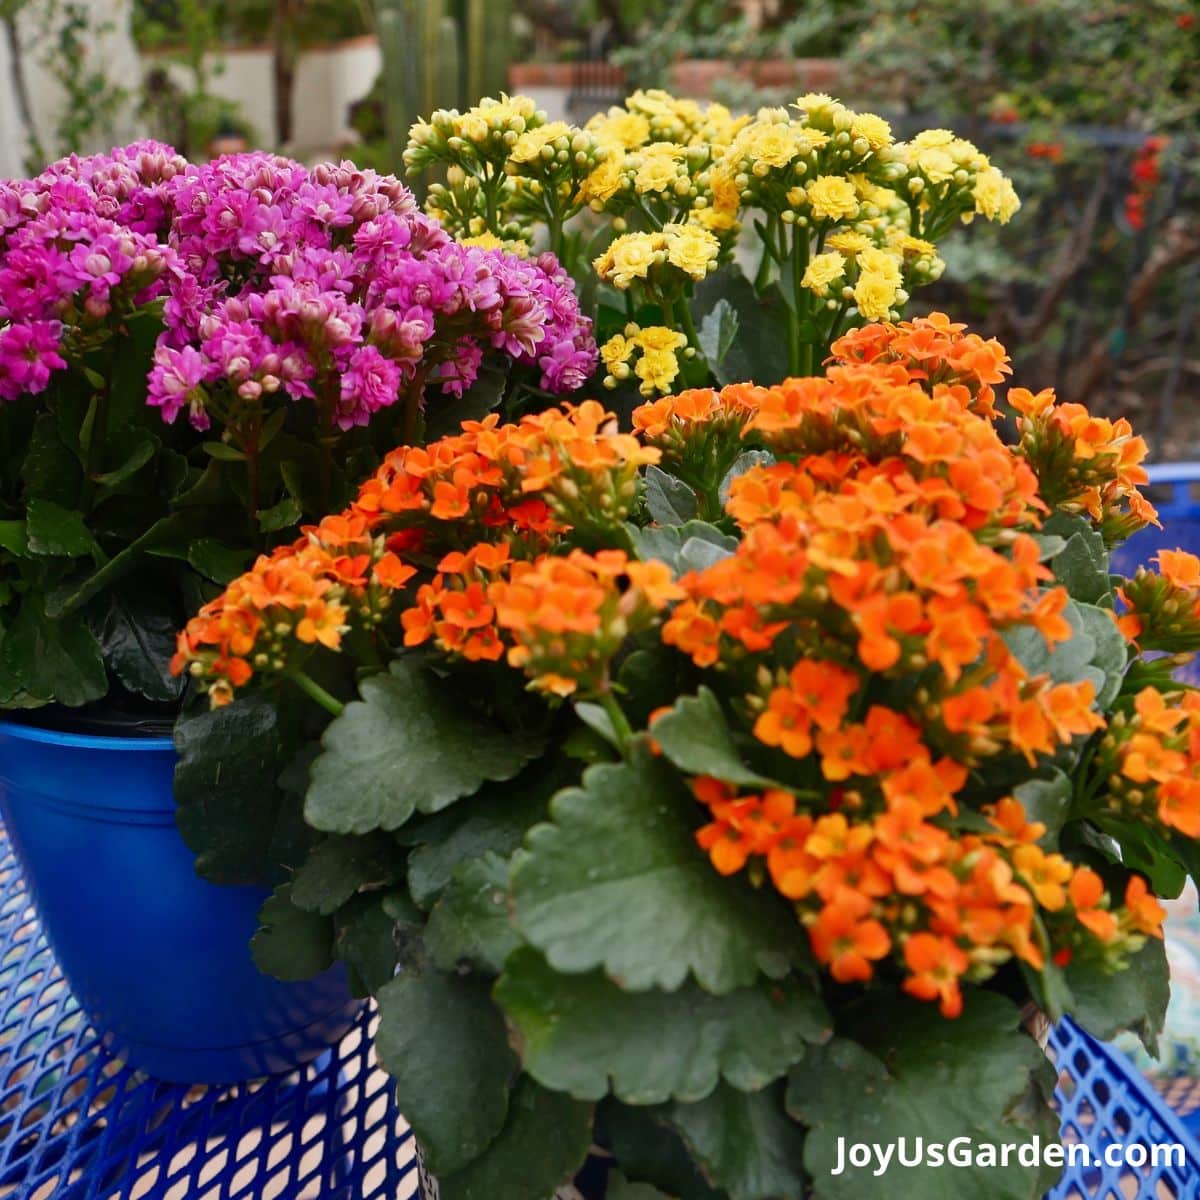 calandiva and kalanchoe in orange yellow and pink sitting on outdoor blue table